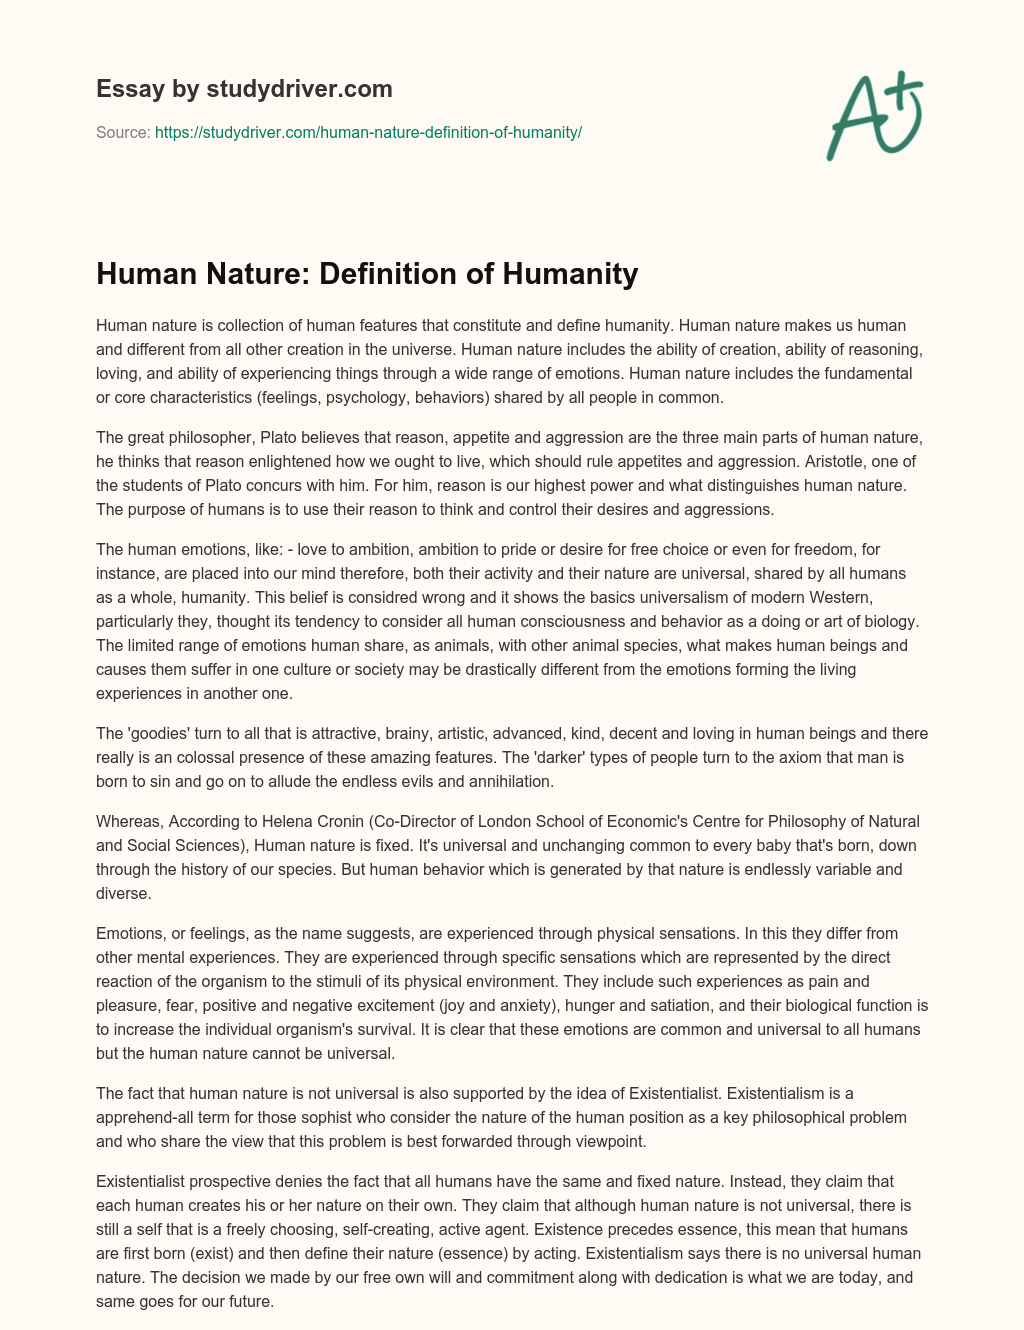 Human Nature: Definition of Humanity essay